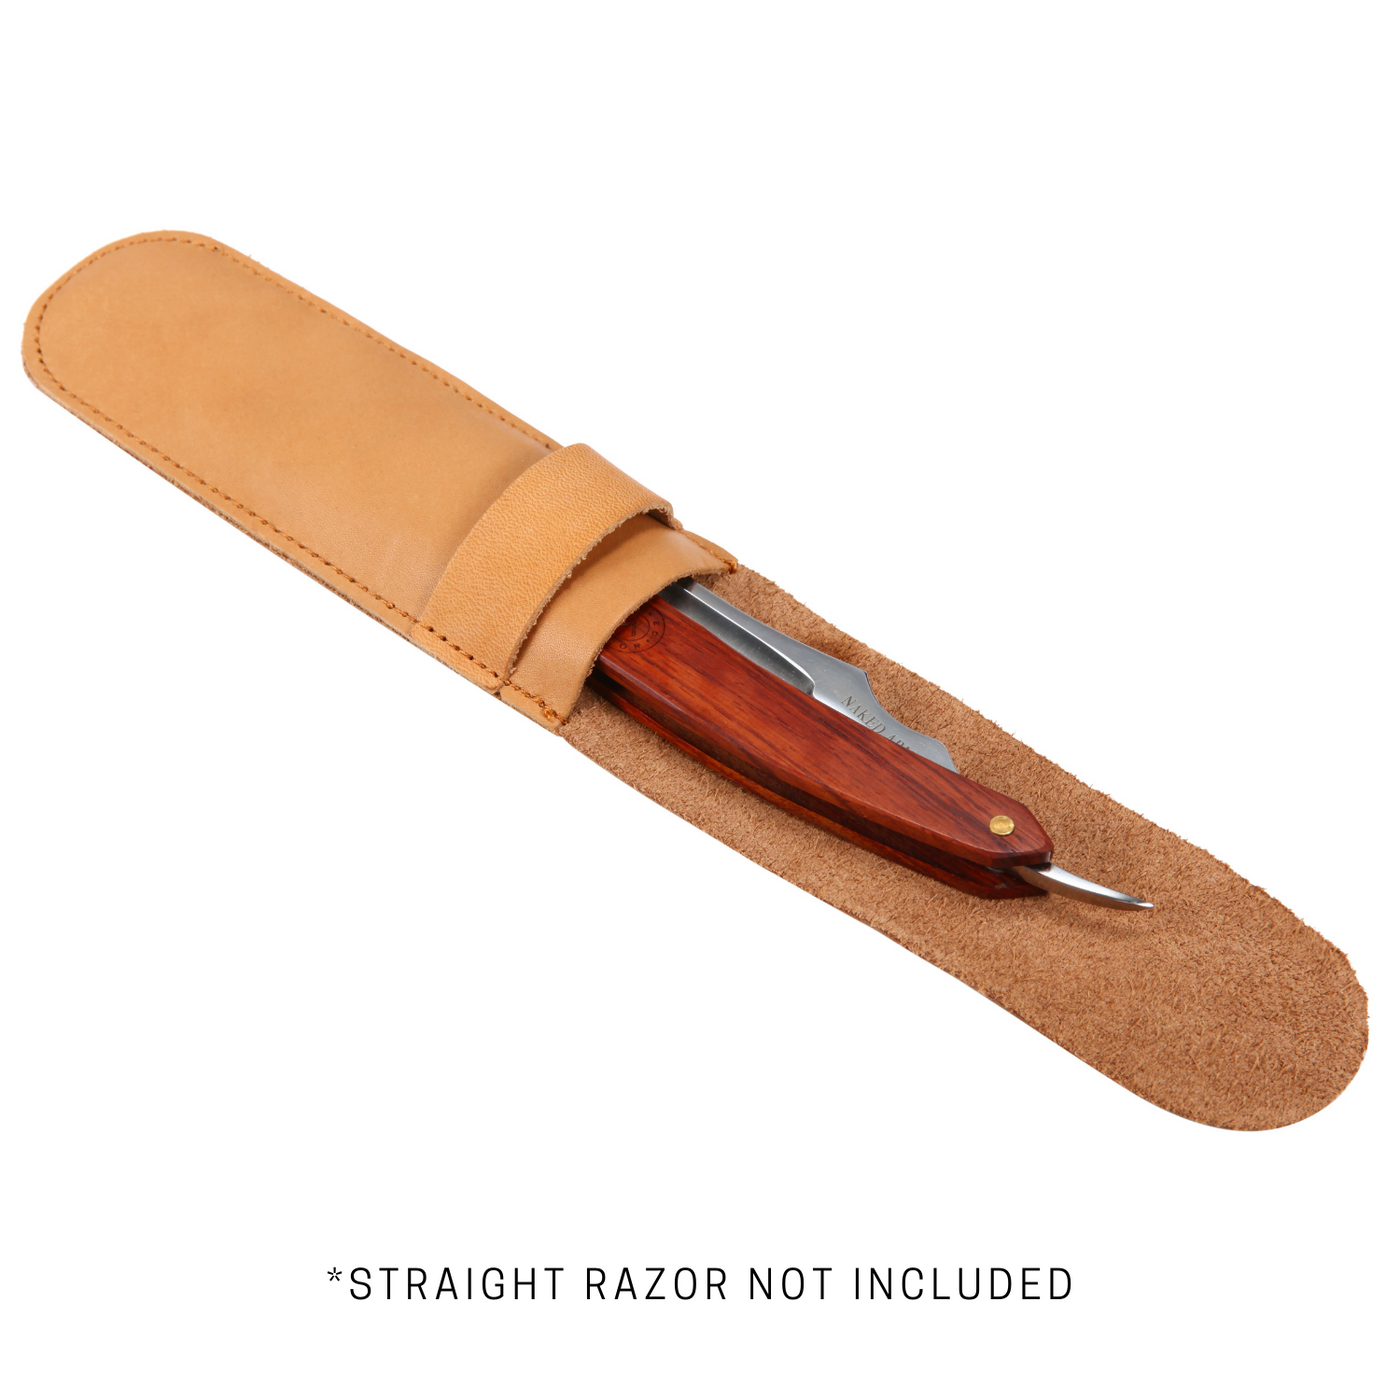  Claudin Straight Razor Case by Naked Armor sold by Naked Armor Razors